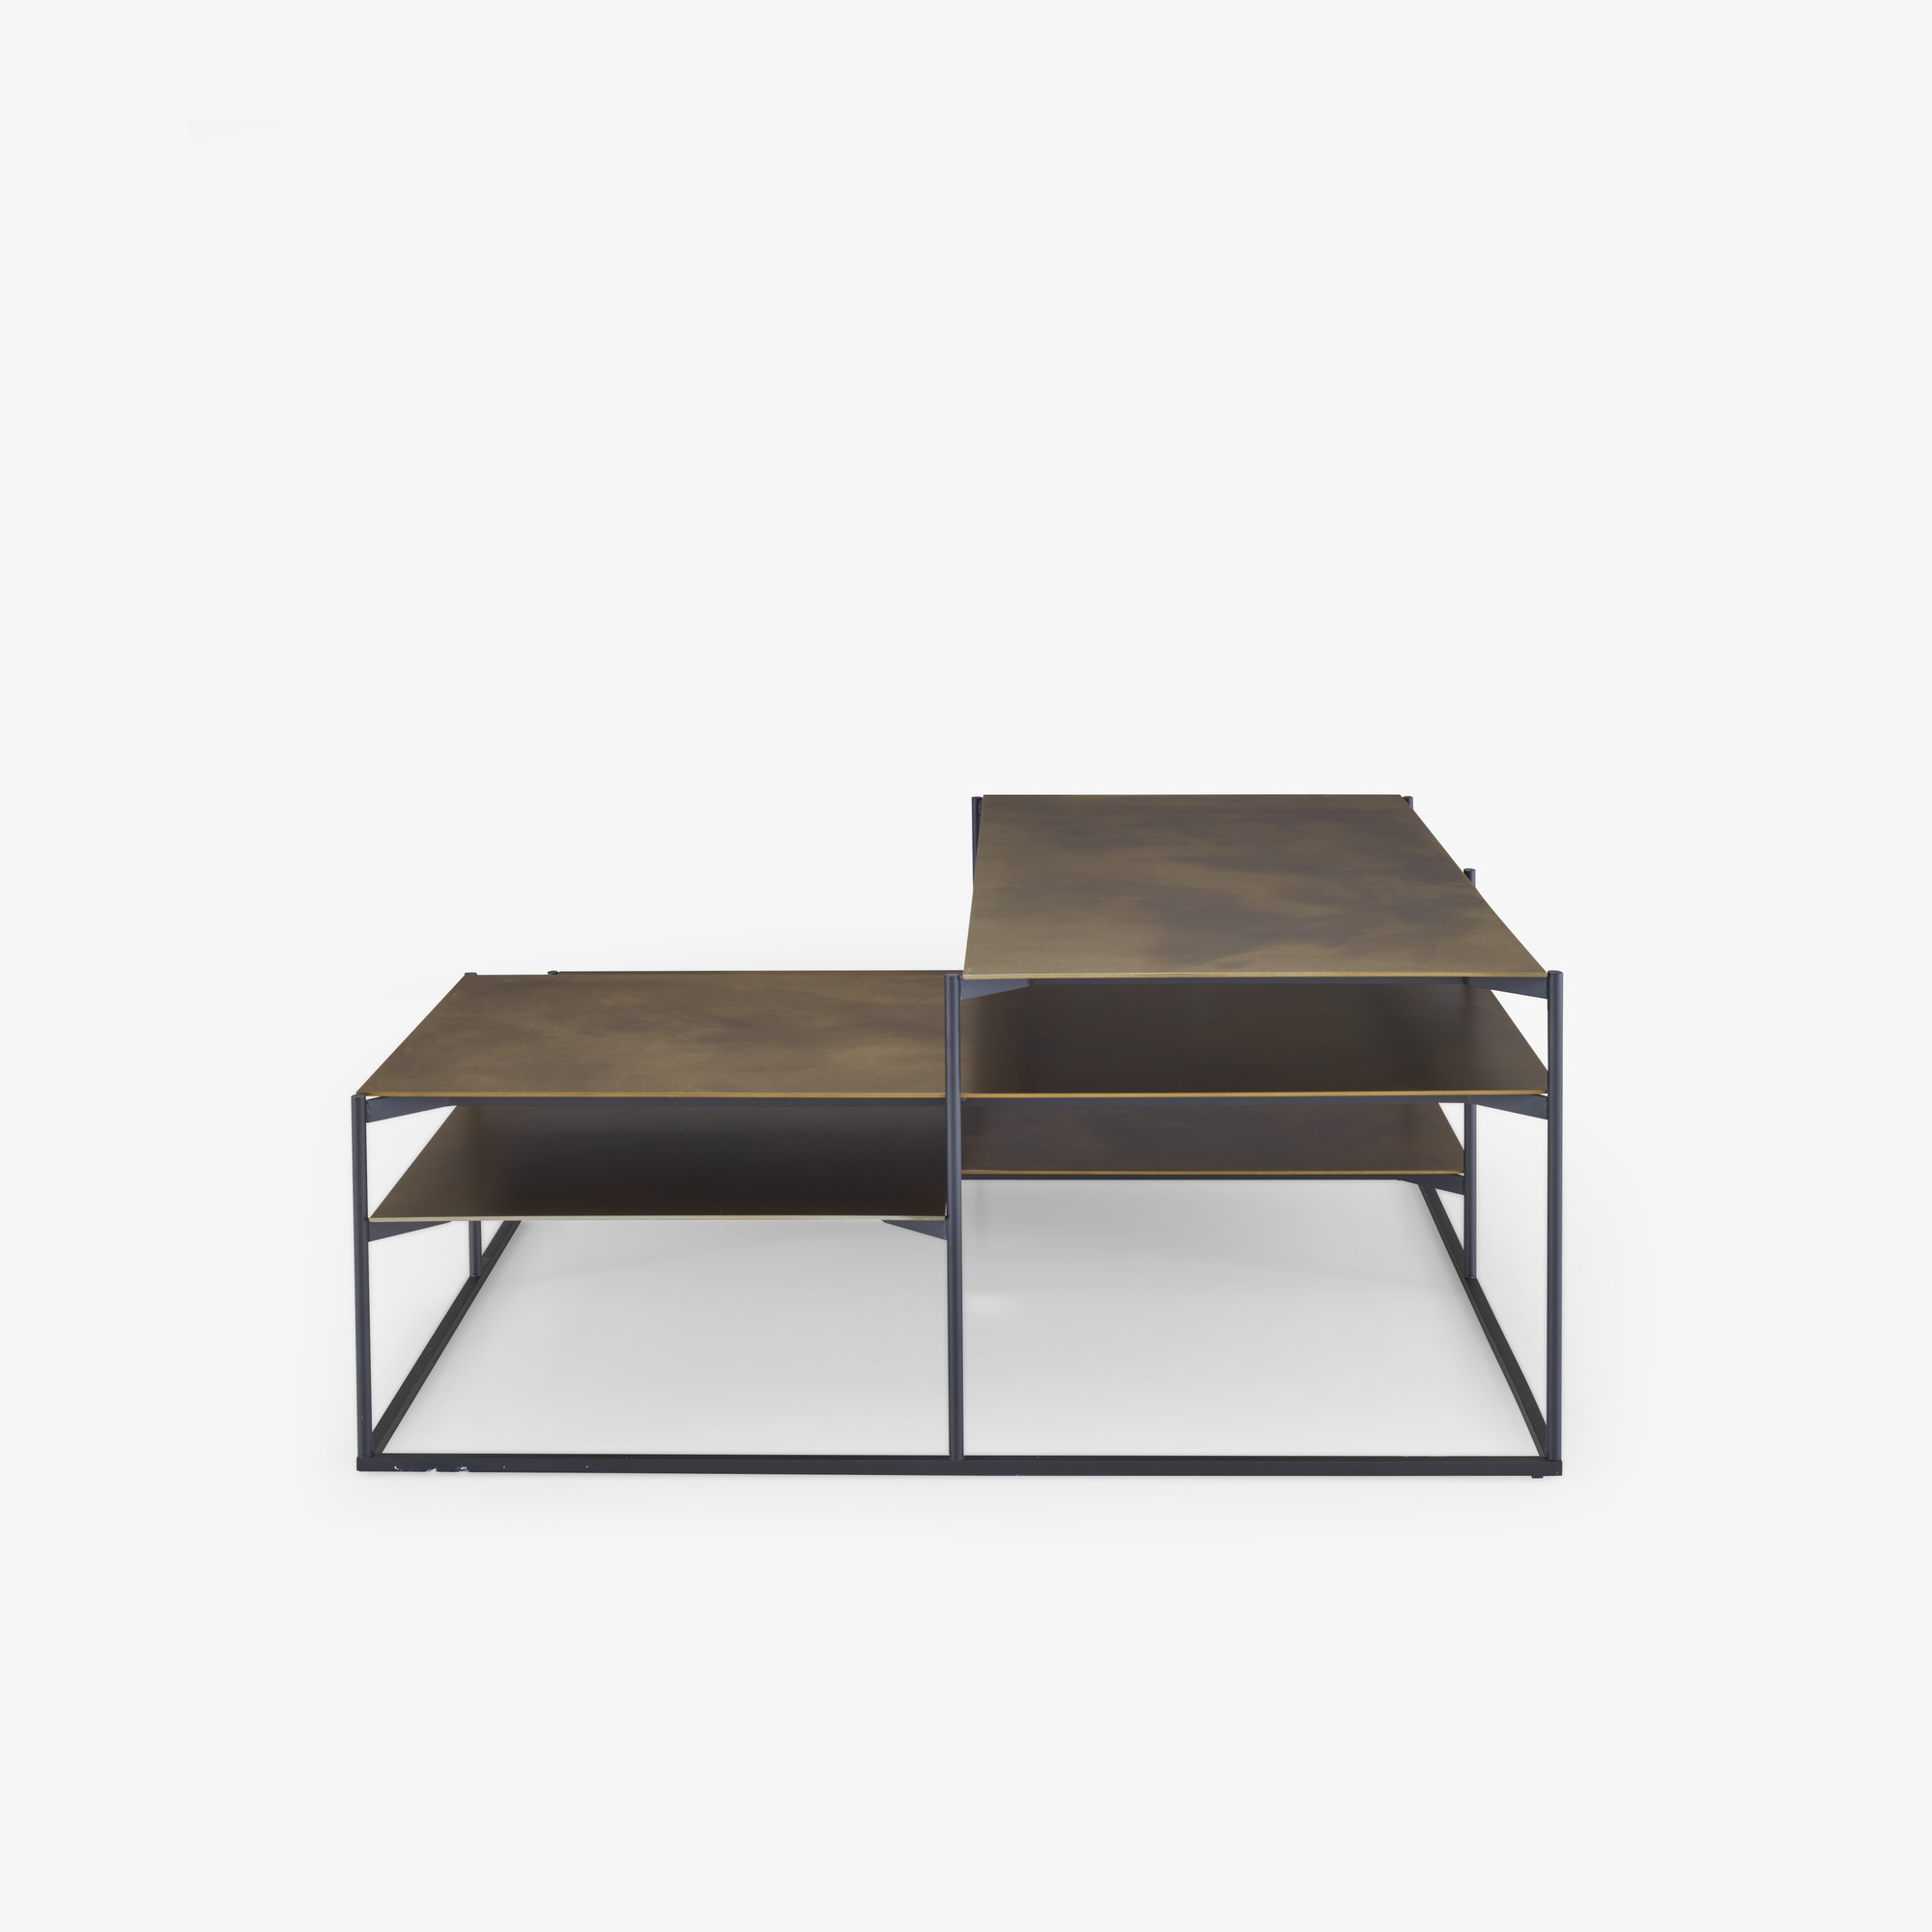 Image Low table small tops in golden brass aspect steel 2